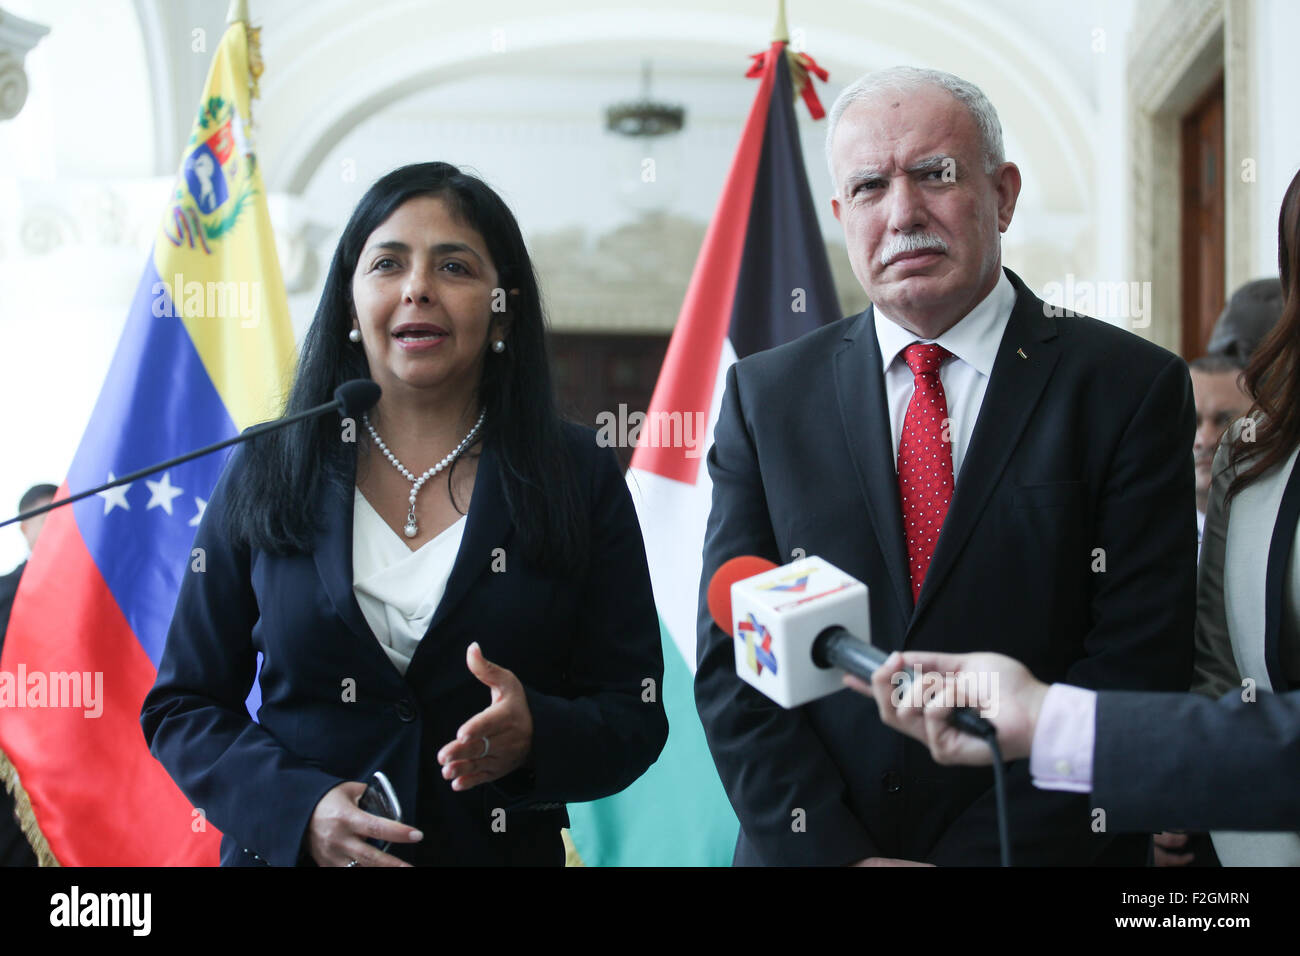 Caracas, Venezuela. 18th Sep, 2015. Minister of Foreing Affairs of Venezuela Delcy Rodriguez (L) and her Palestinian counterpart Riad Al Malki (R) speaks to the media at the headquarters of the Foreing Ministry in Caracas, Venezuela, on Sept. 18, 2015. © Boris Vergara/Xinhua/Alamy Live News Stock Photo